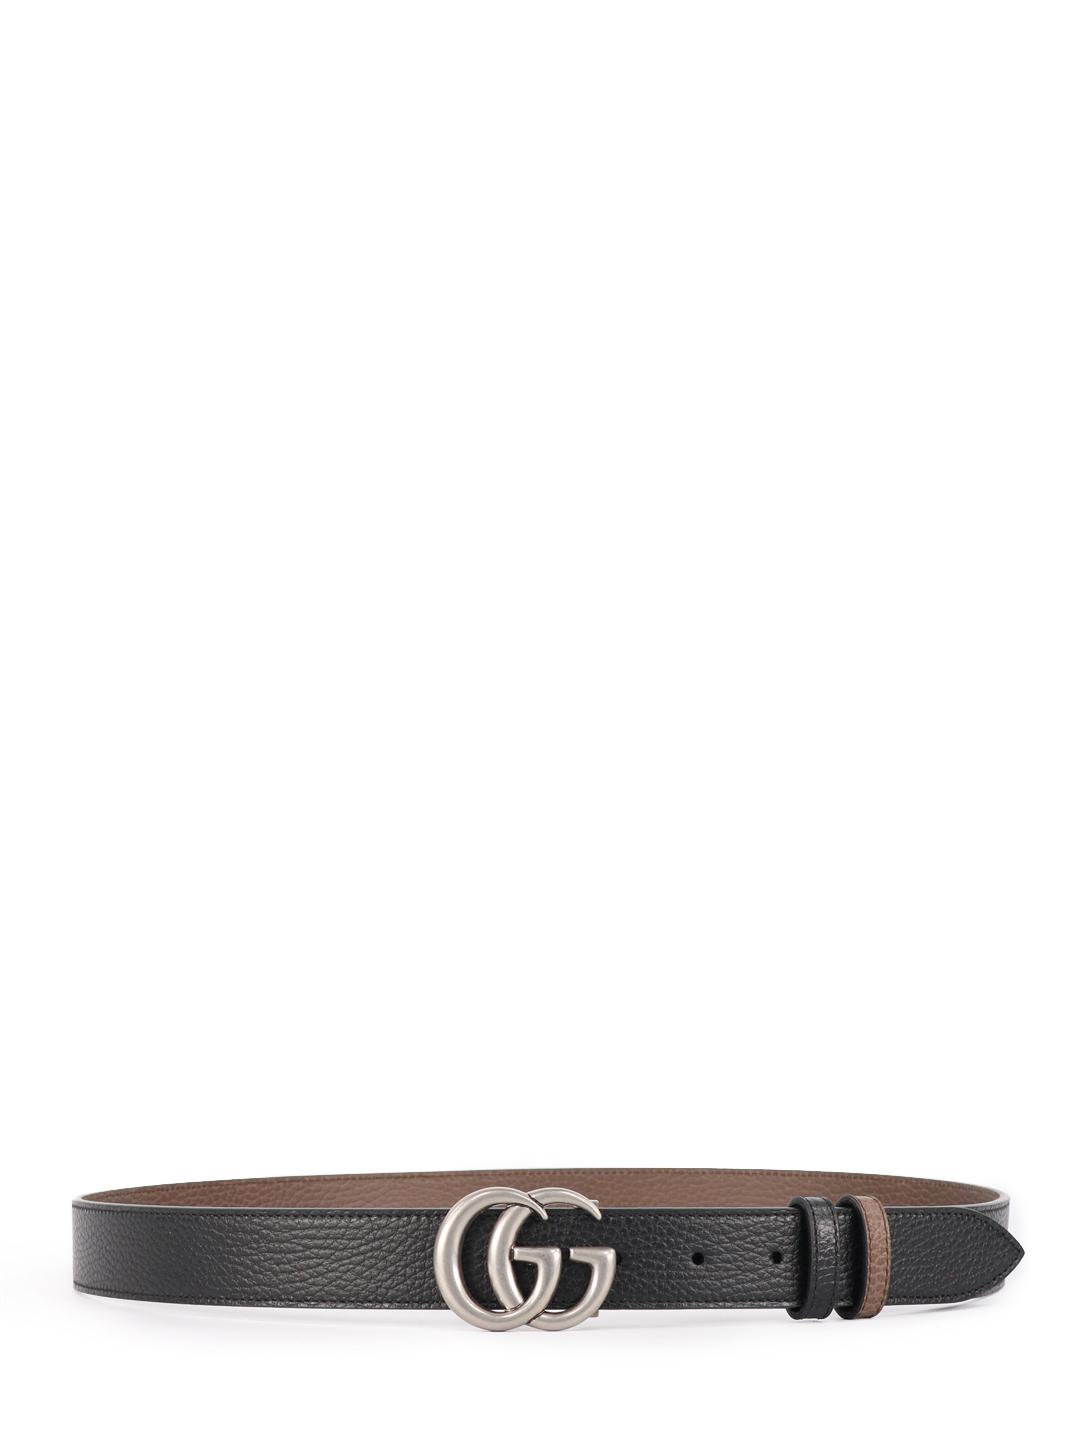 Gucci Reversible GG Marmont Buckle Belt Black for -